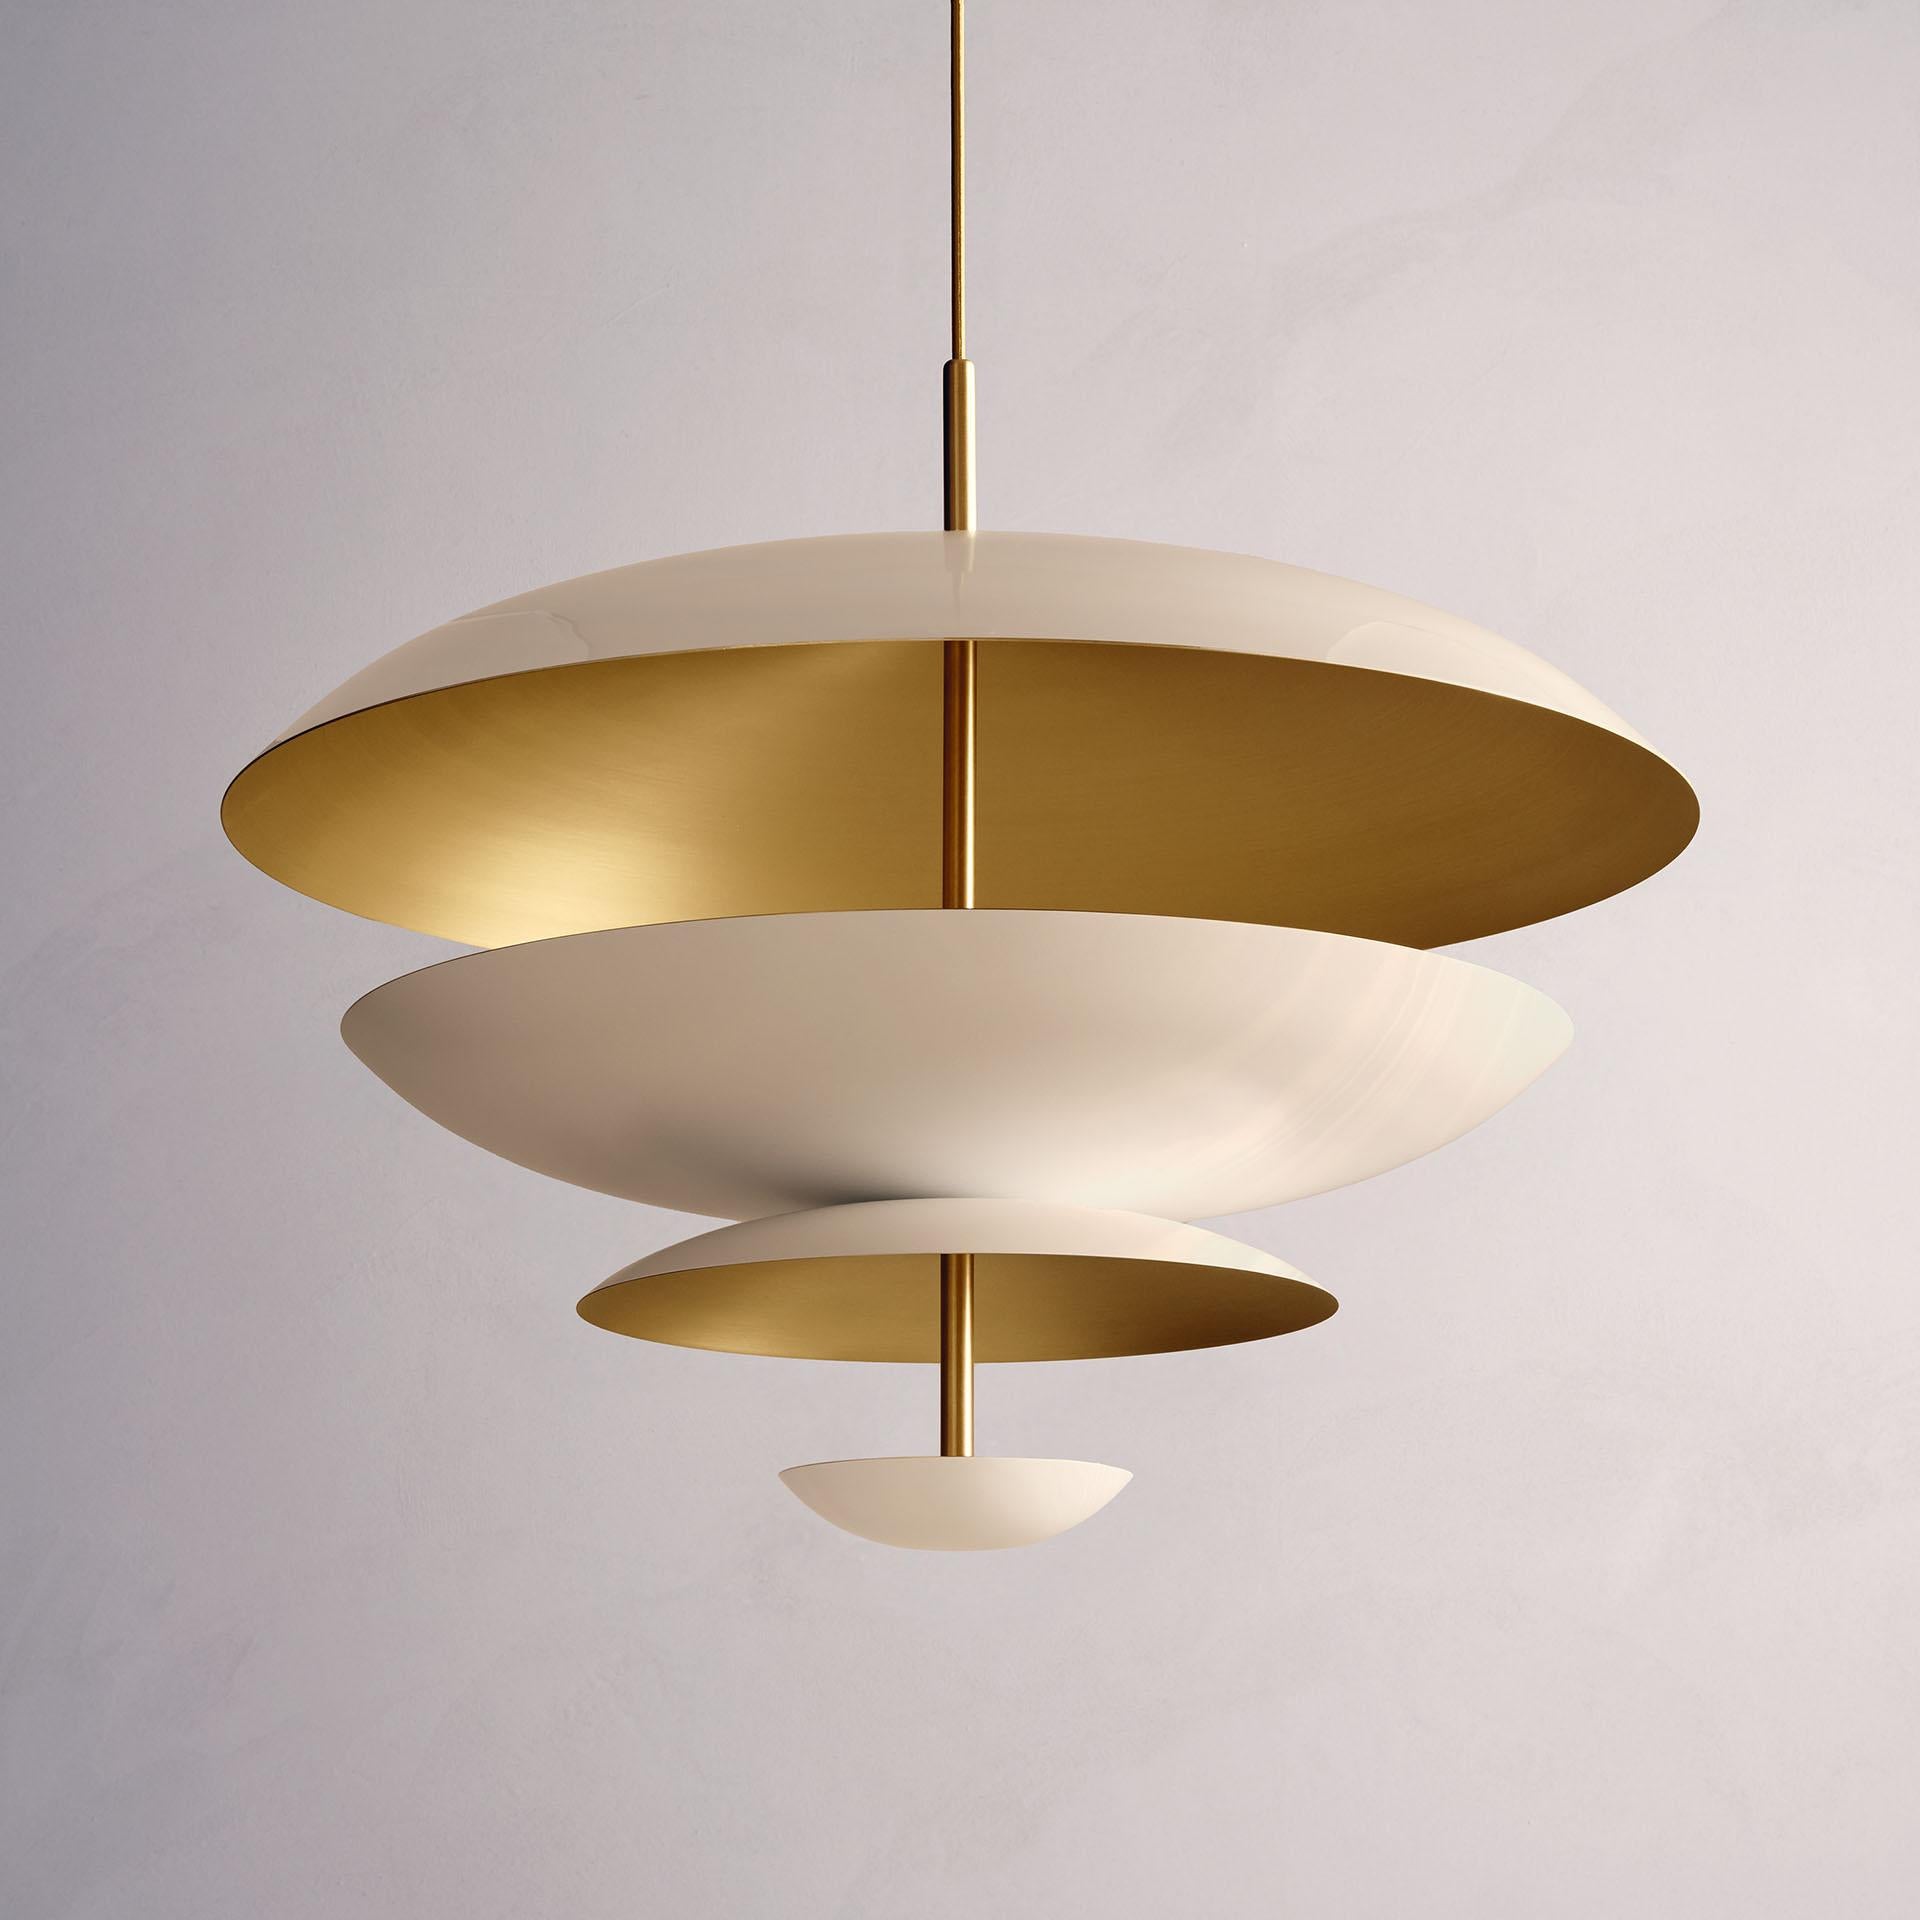 'Cosmic Purion Chandelier 100' Handmade Piano Lacquered Brass Ceiling Light In New Condition For Sale In London, GB